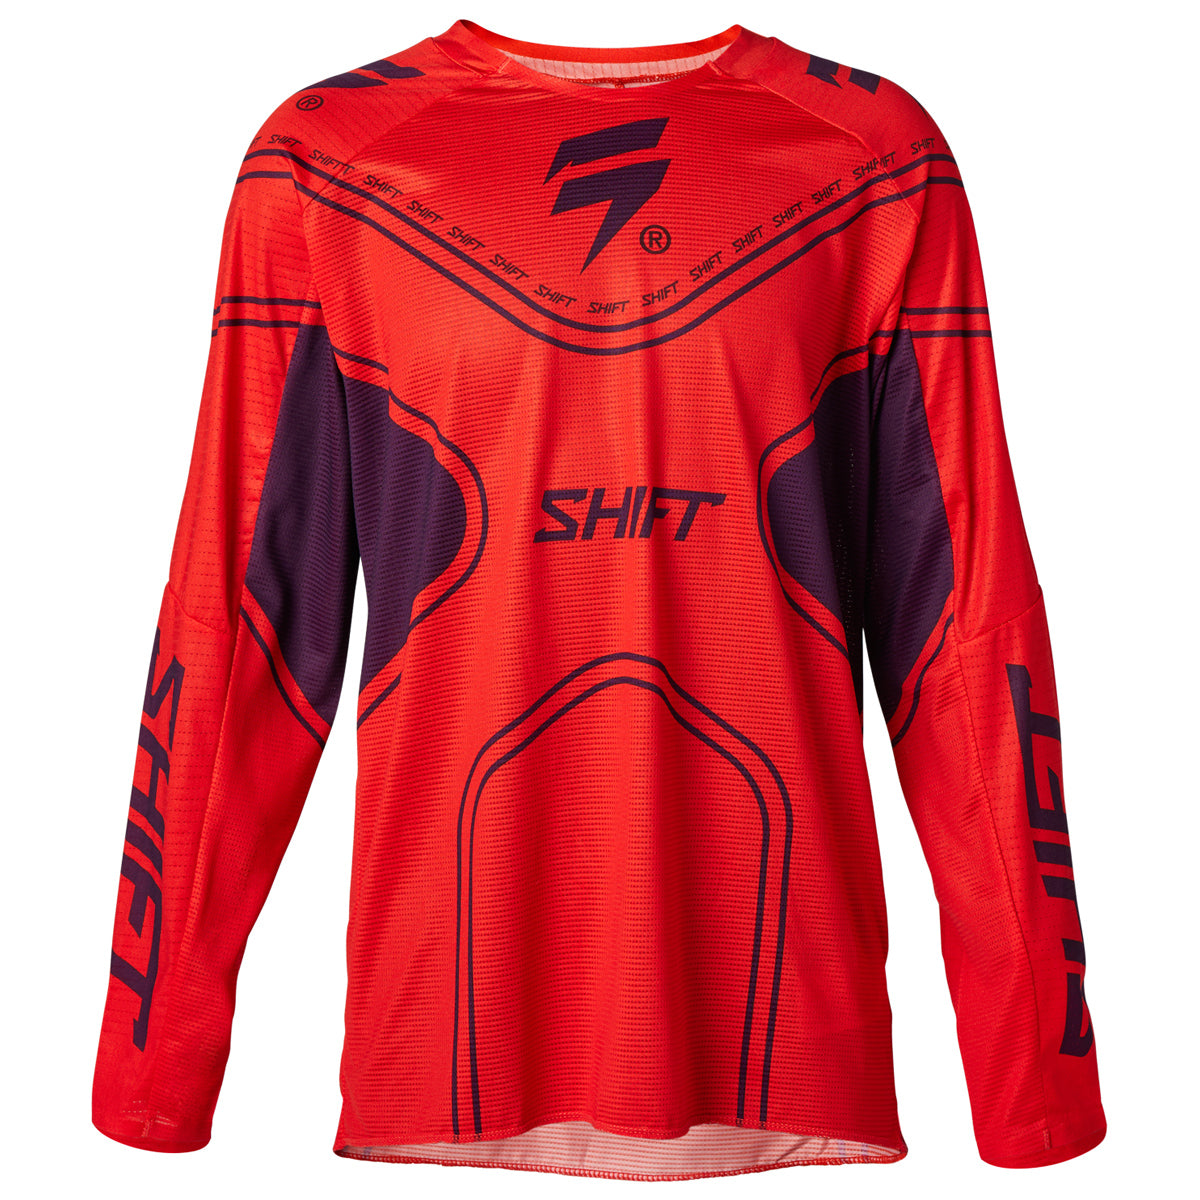 Youth Black Label Jersey - Qwik Flo Red